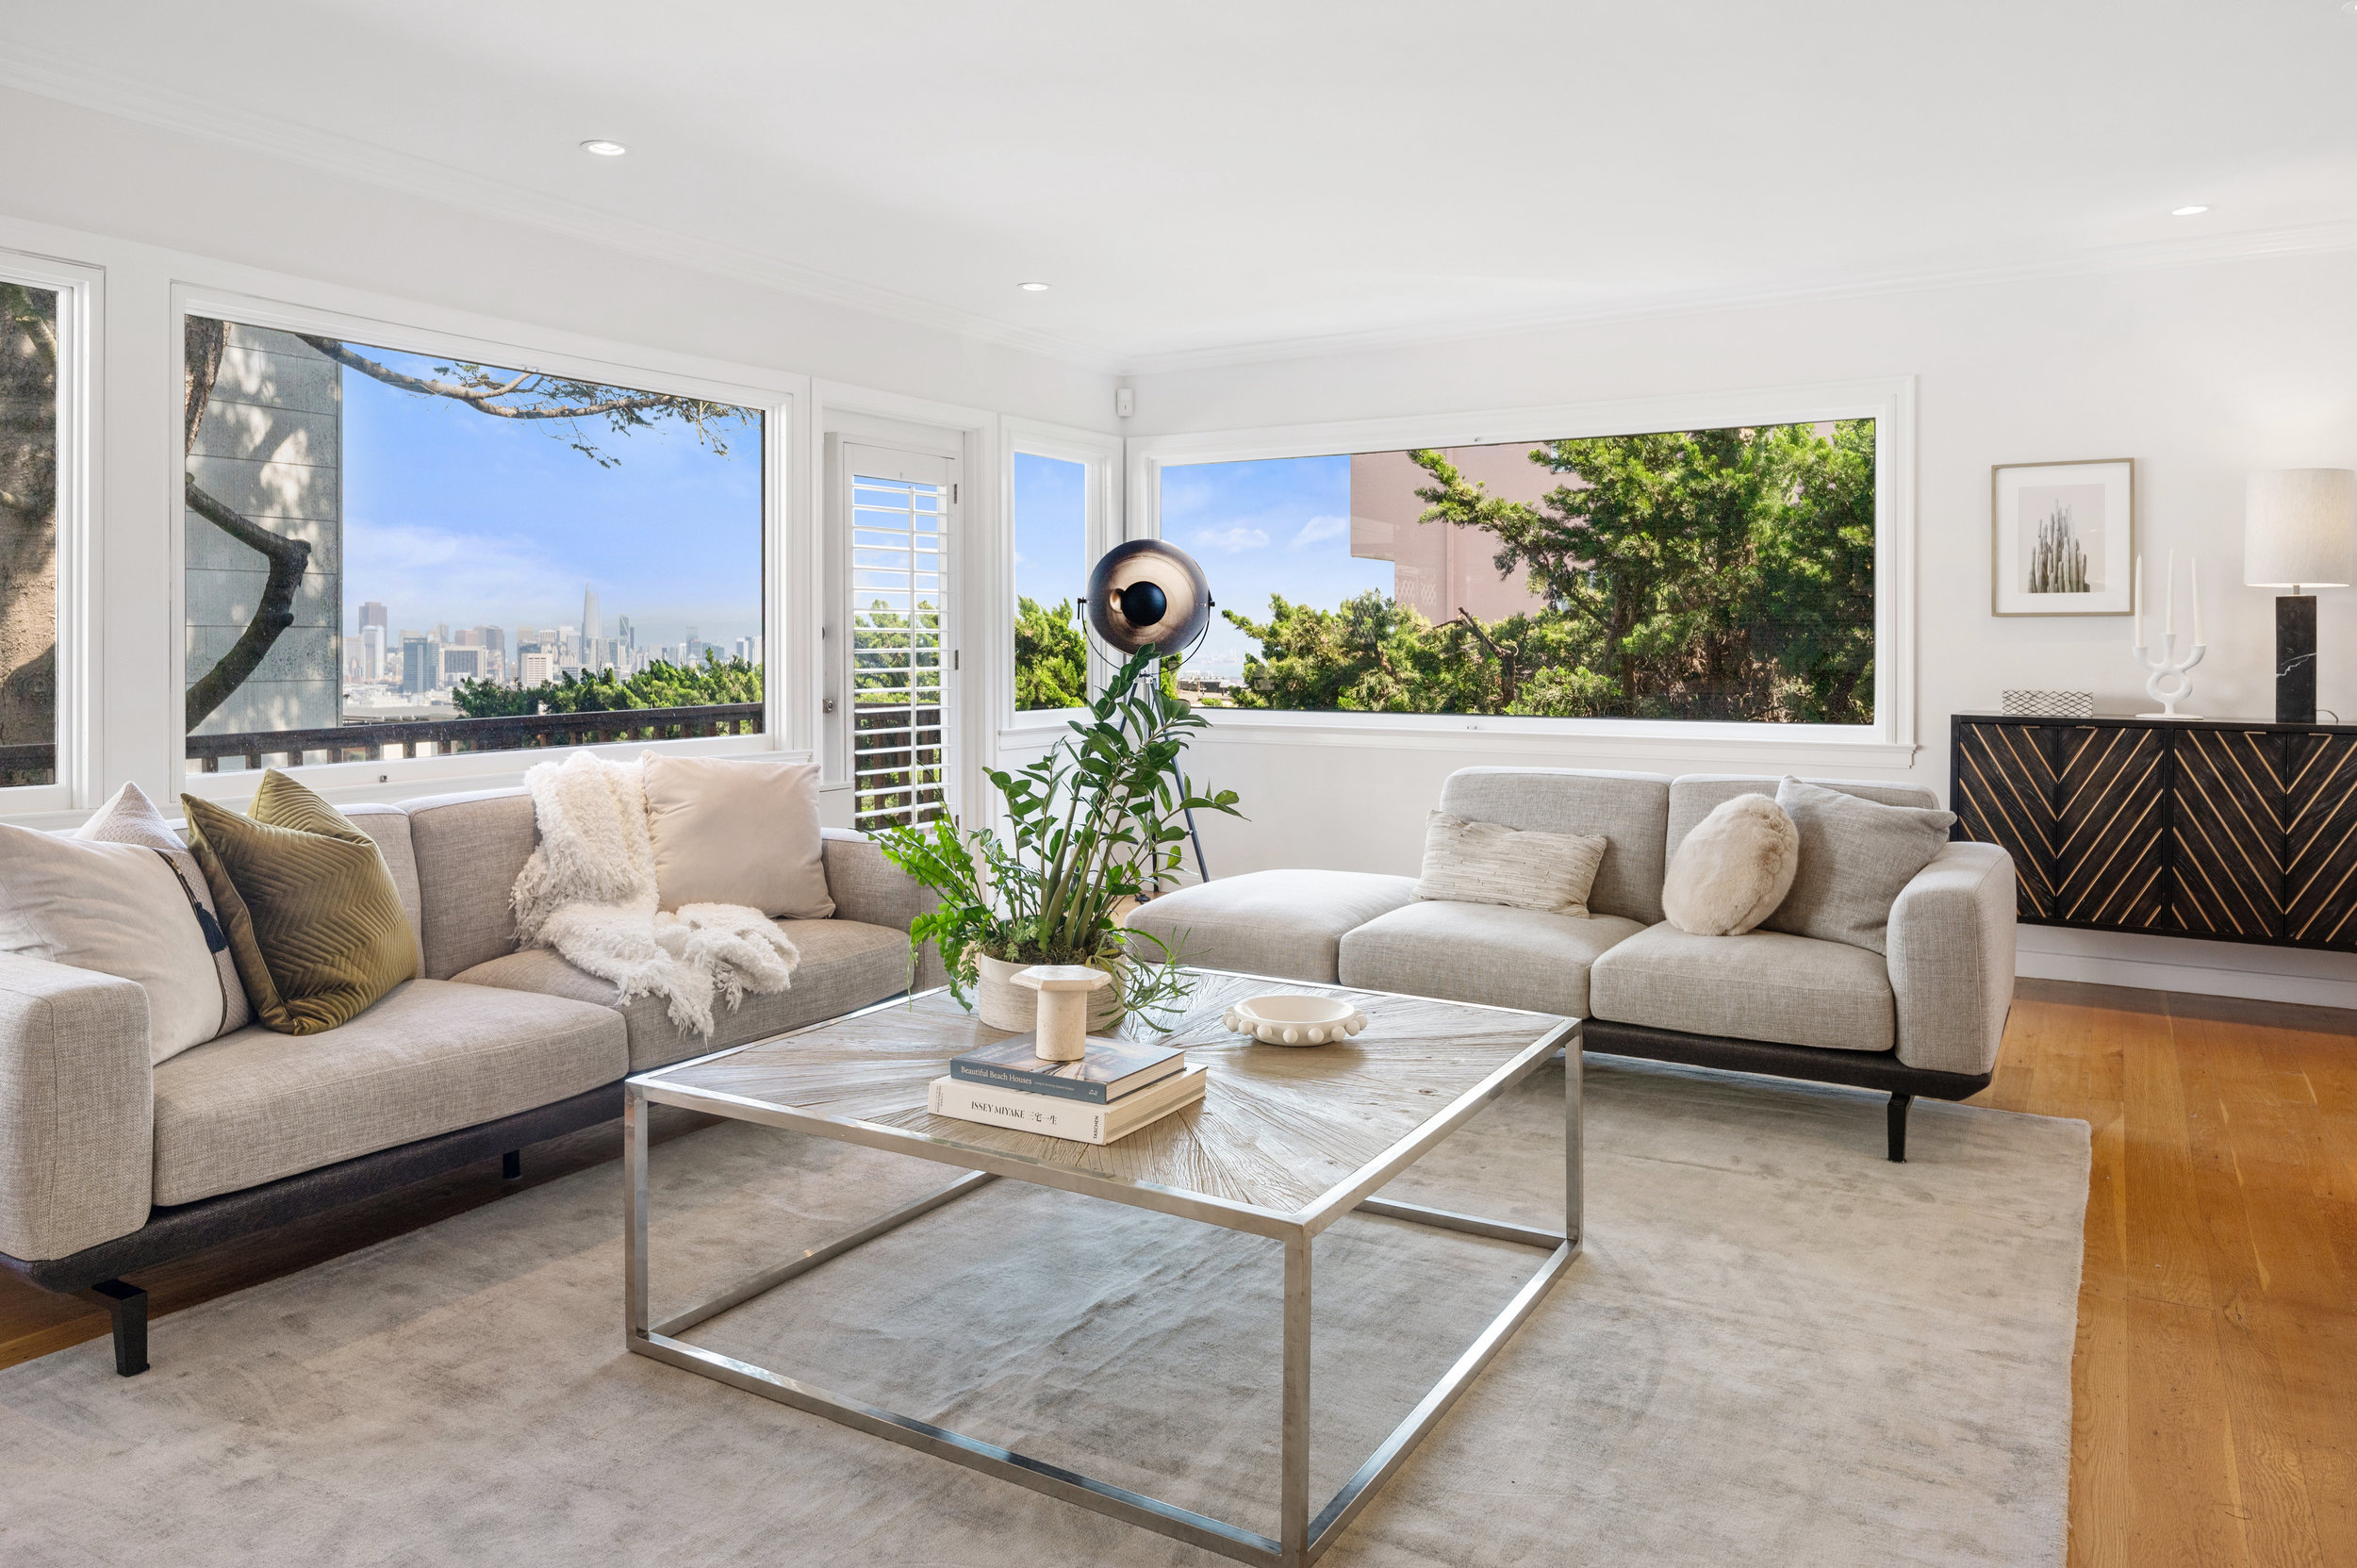 Property Photo: Living room with large windows and views of downtown San Francisco